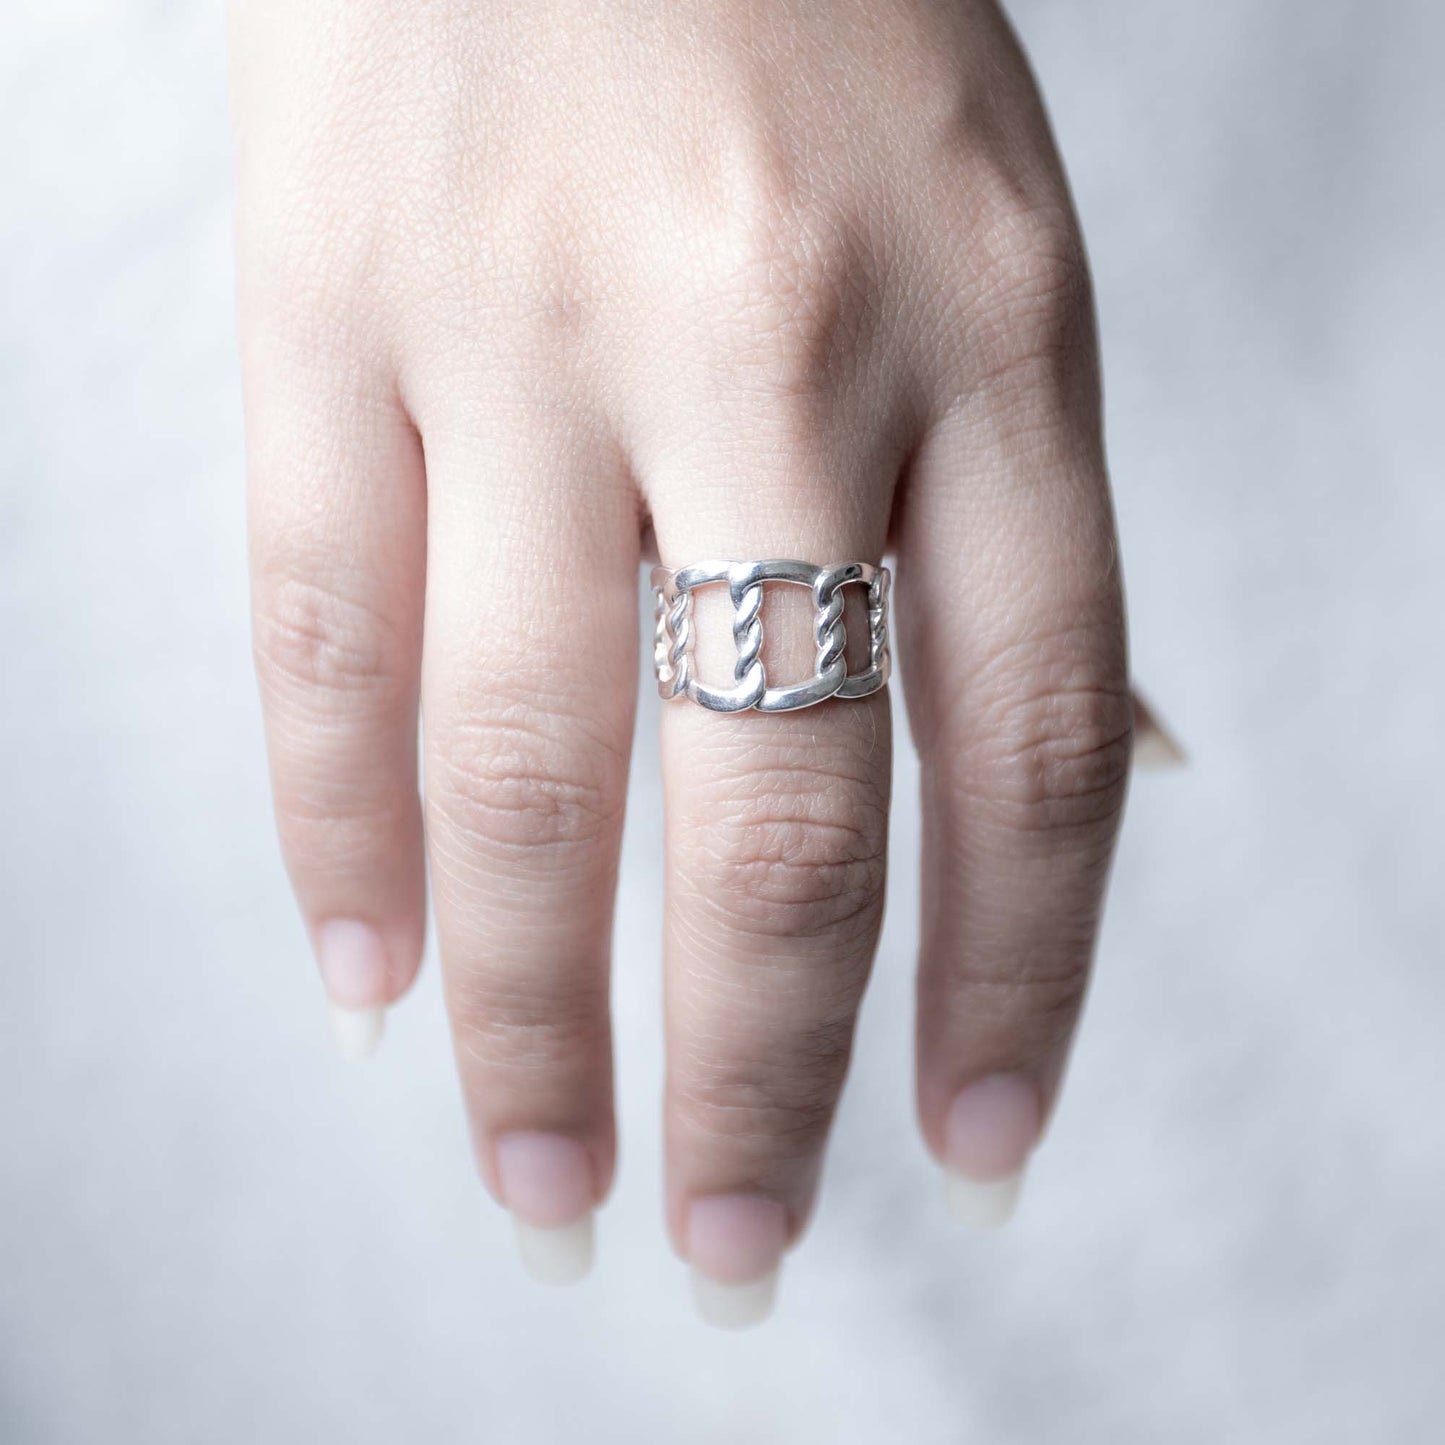 Chain- 925 Silver ring